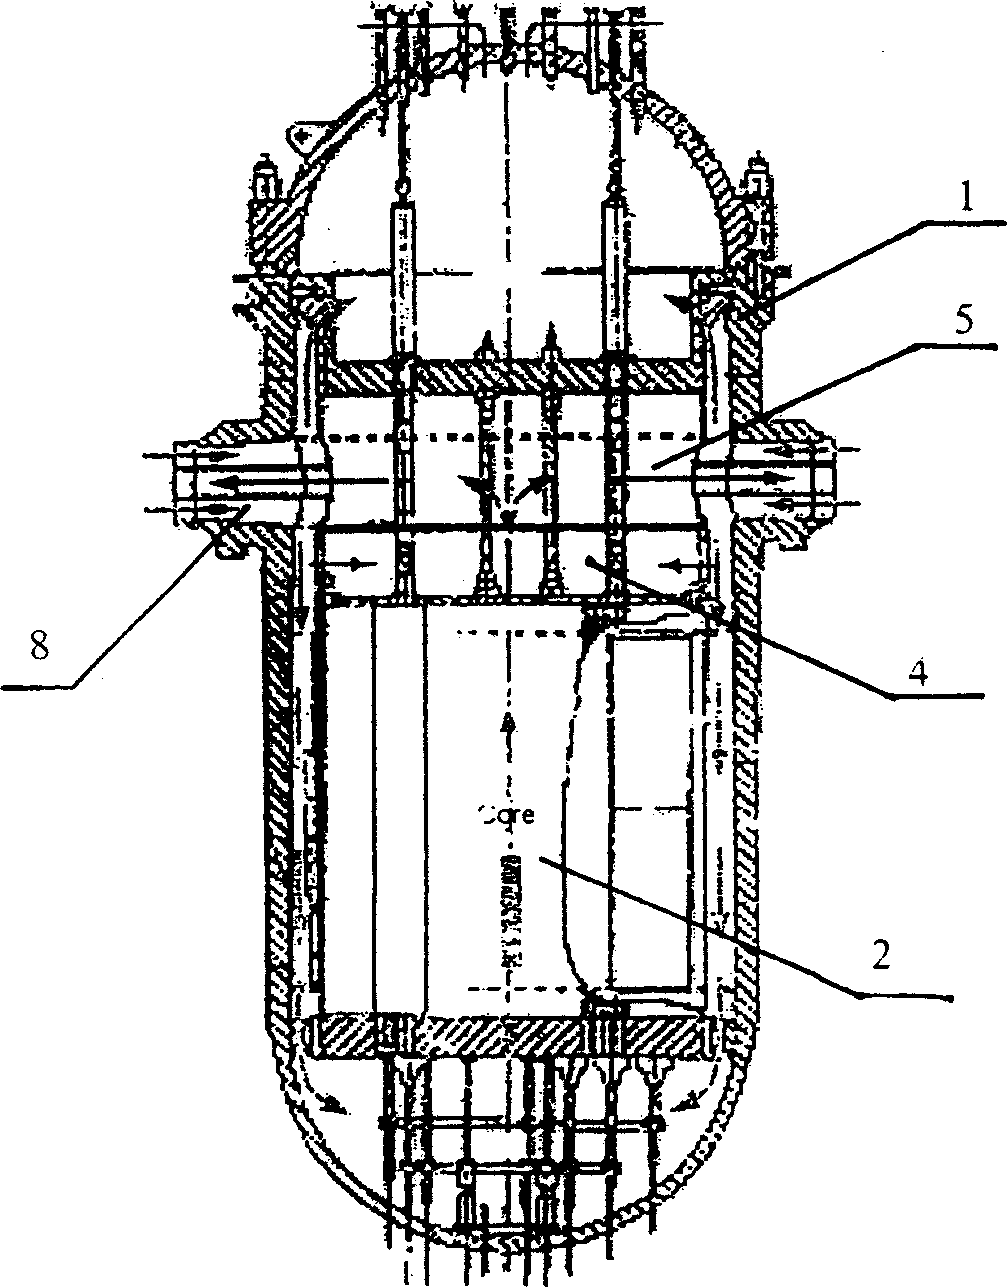 Supercritical water nuclear reactor utilizing sleeve fuel assembly